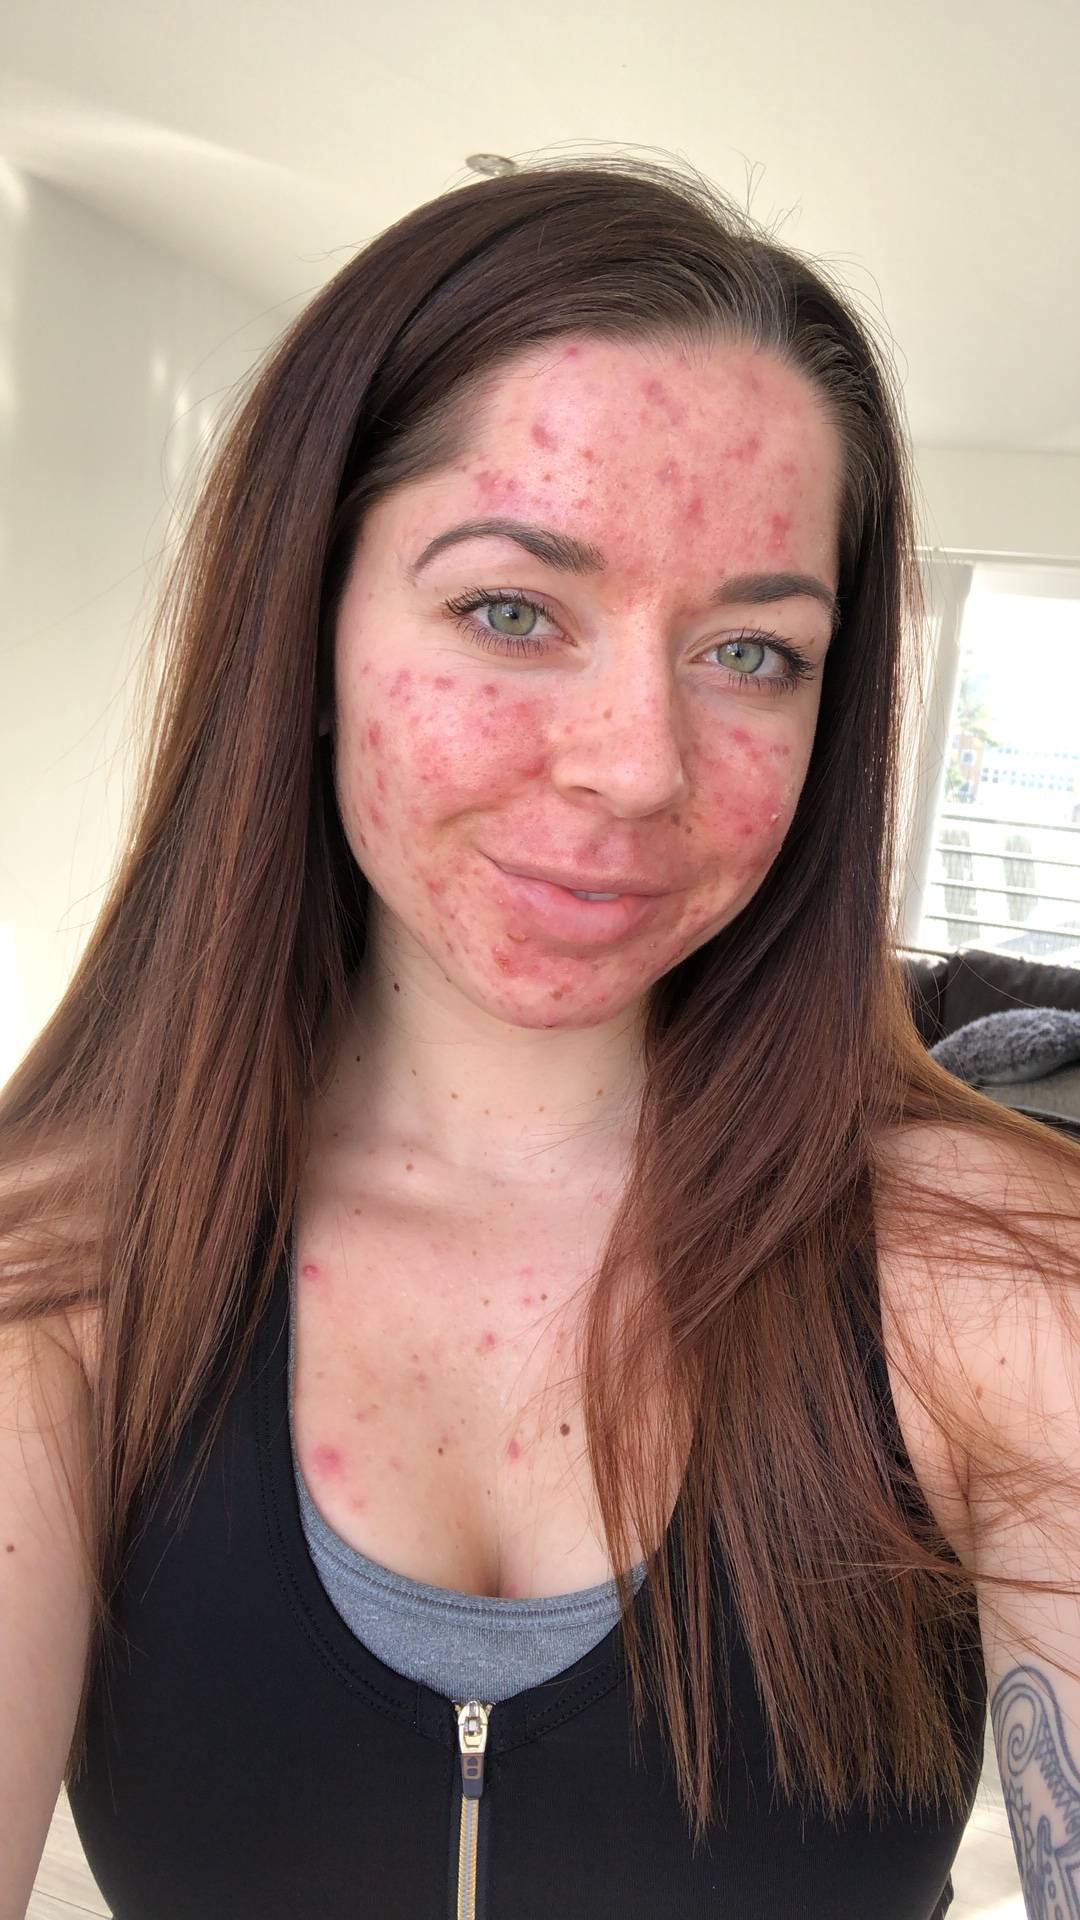 Dealing With Acne: Emily